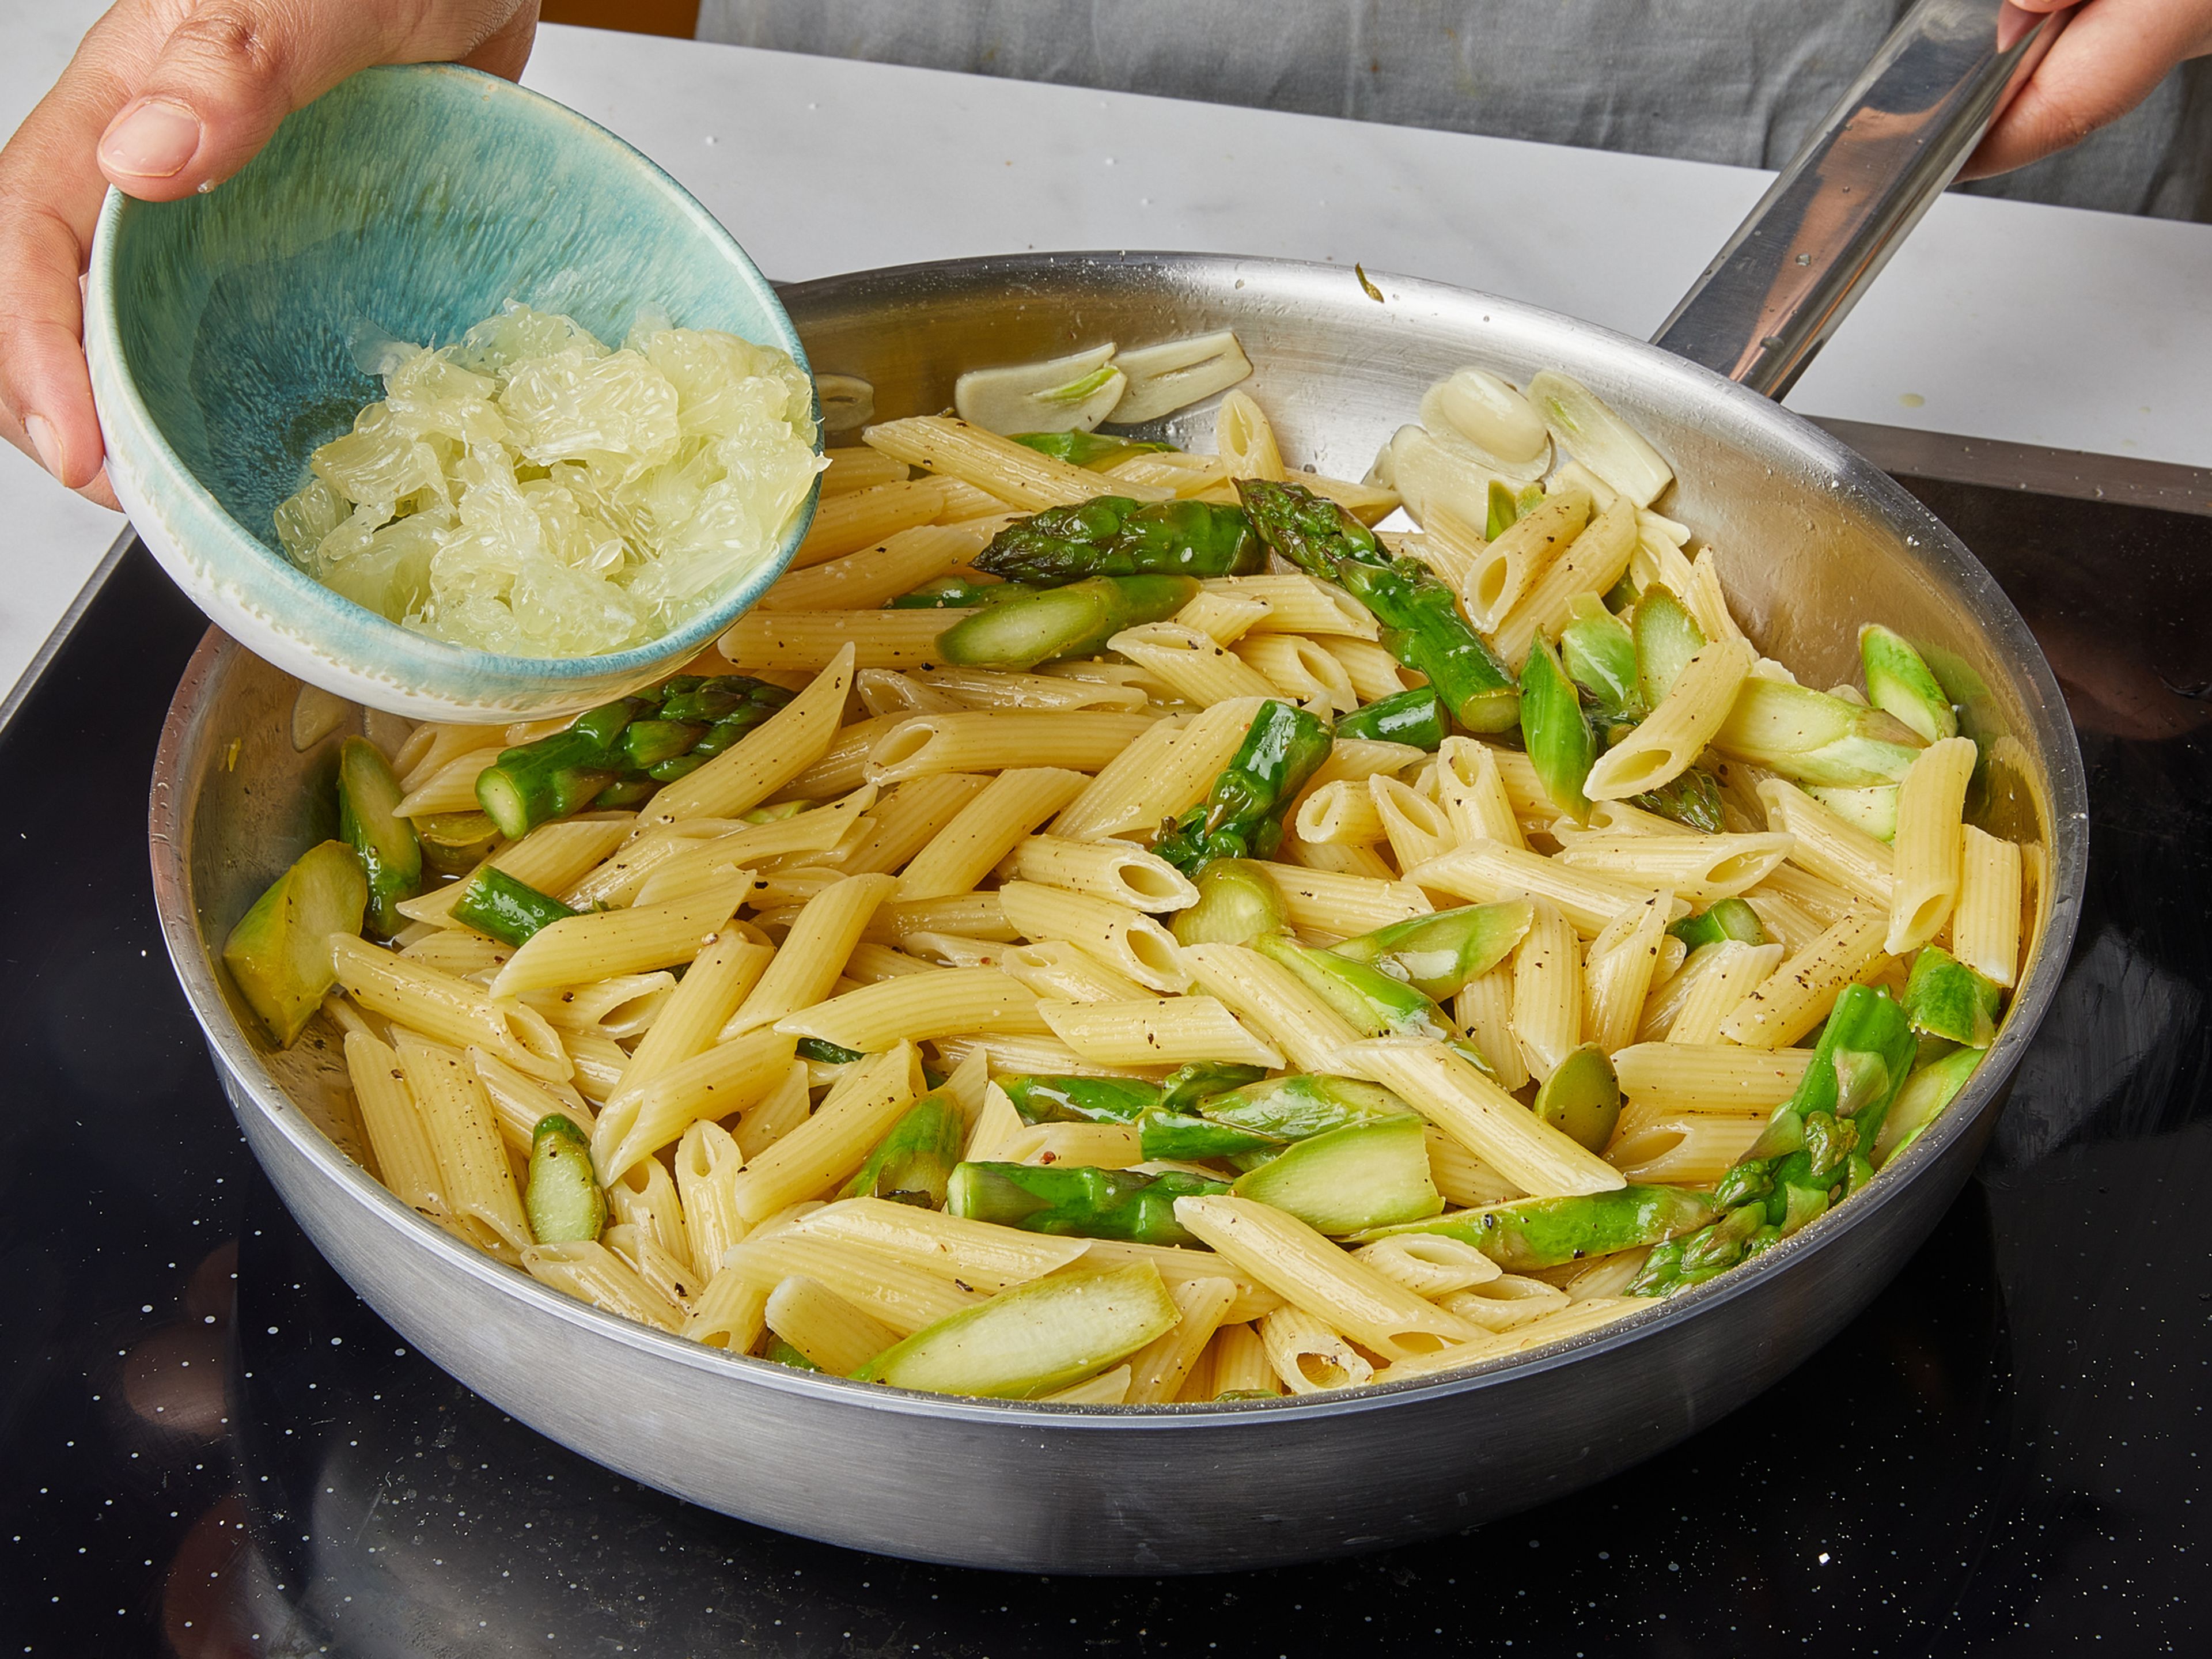 Drain the pasta, reserving some pasta water. Add the pasta to a pan and add pasta water again as needed. Season with salt and pepper. Finally, add the flesh of the lemon and basil and toss everything well. Serve with freshly shaved Parmesan cheese and enjoy!